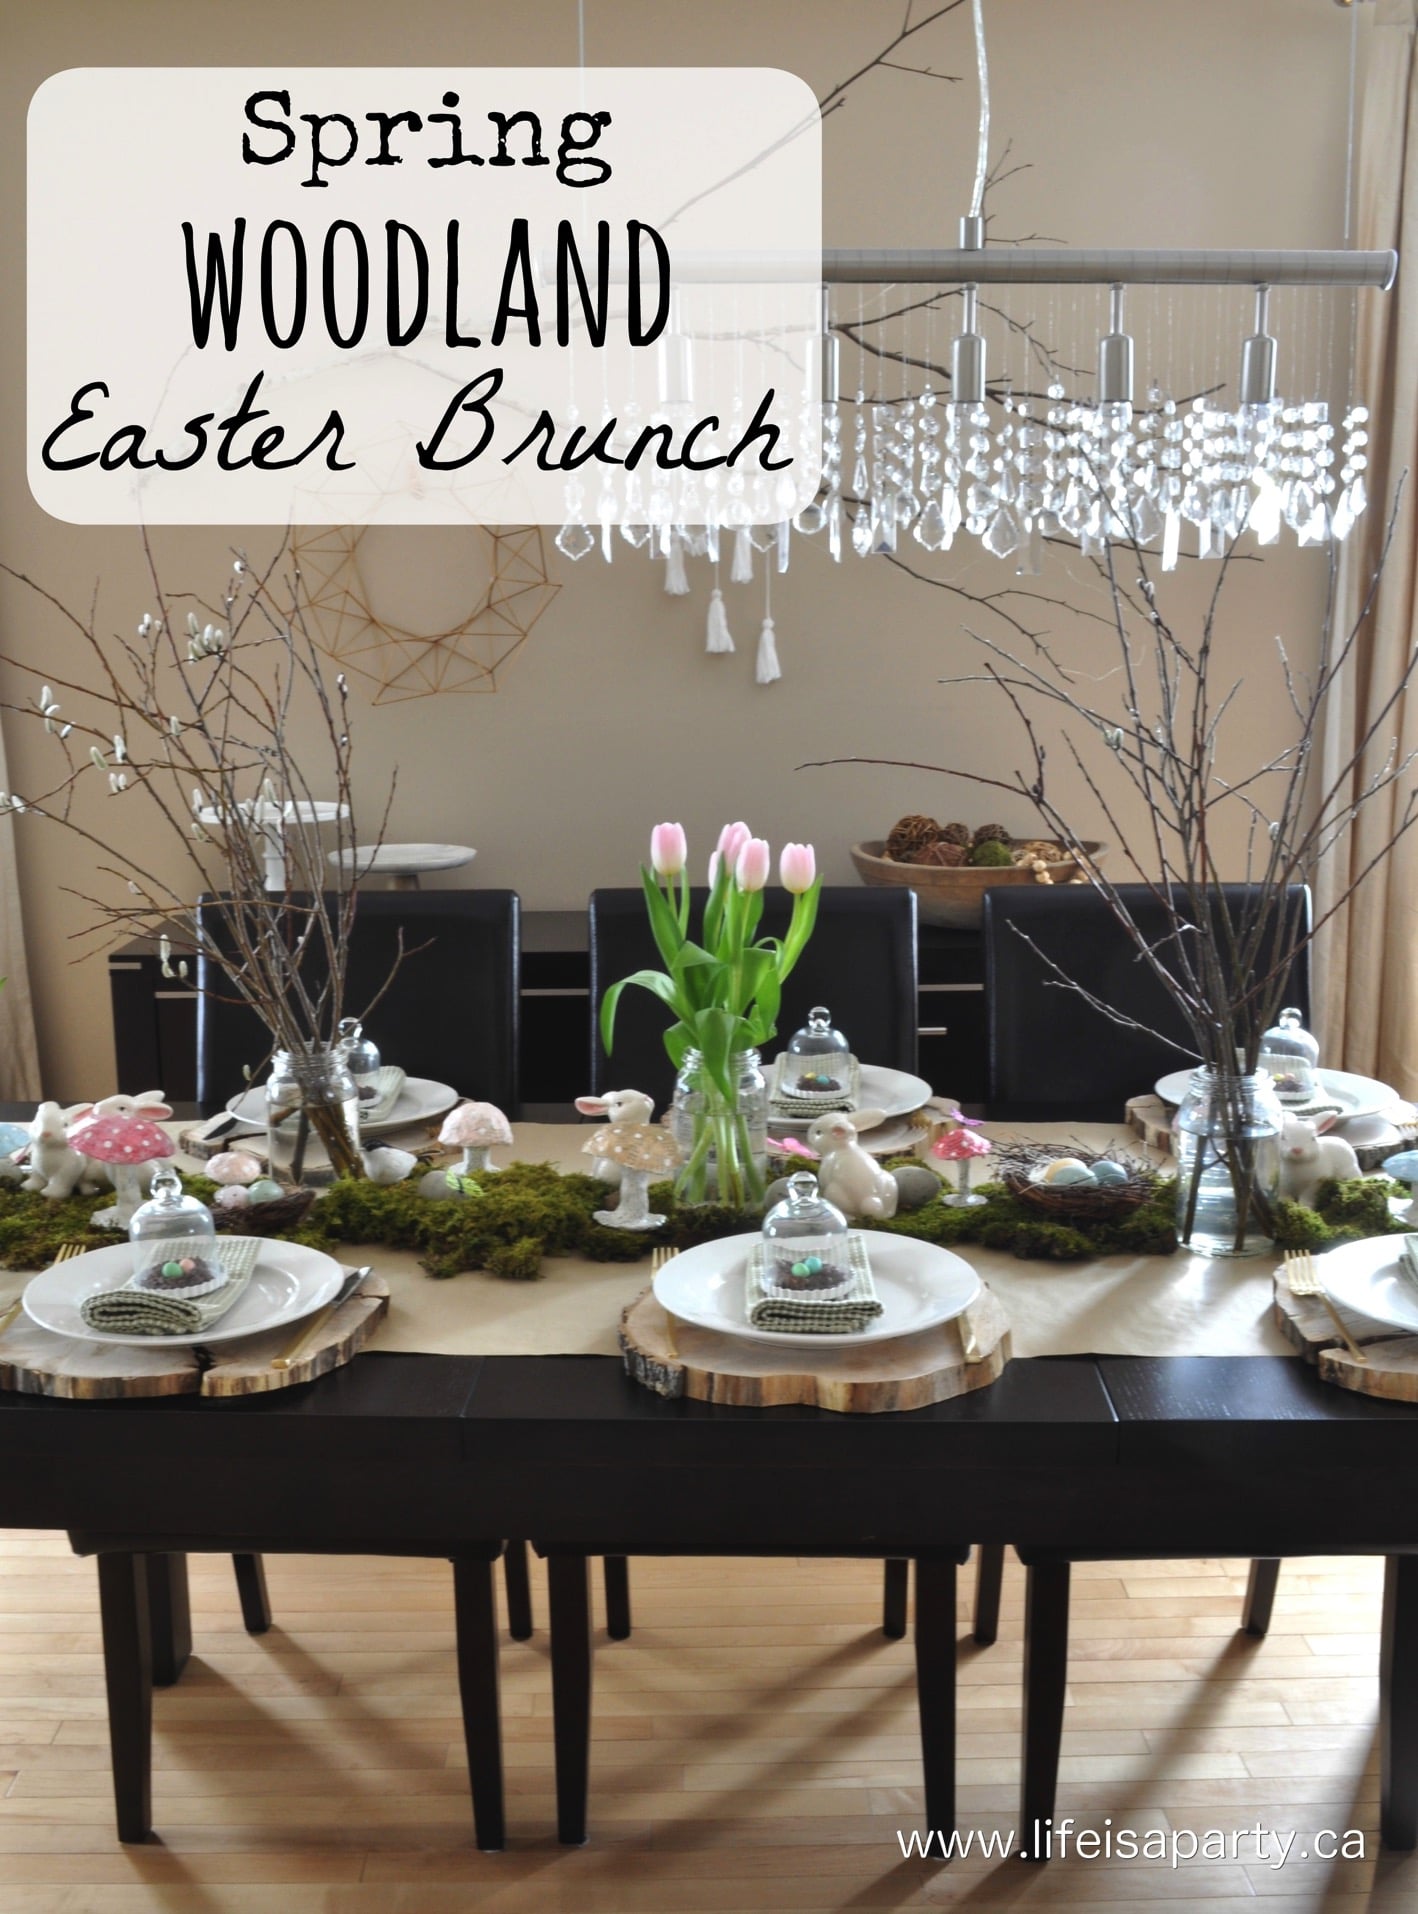 Easter Brunch Menu and Decor Ideas: pretty spring woodland inspired Easter table and decor, and easy make-ahead Easter Brunch menu.